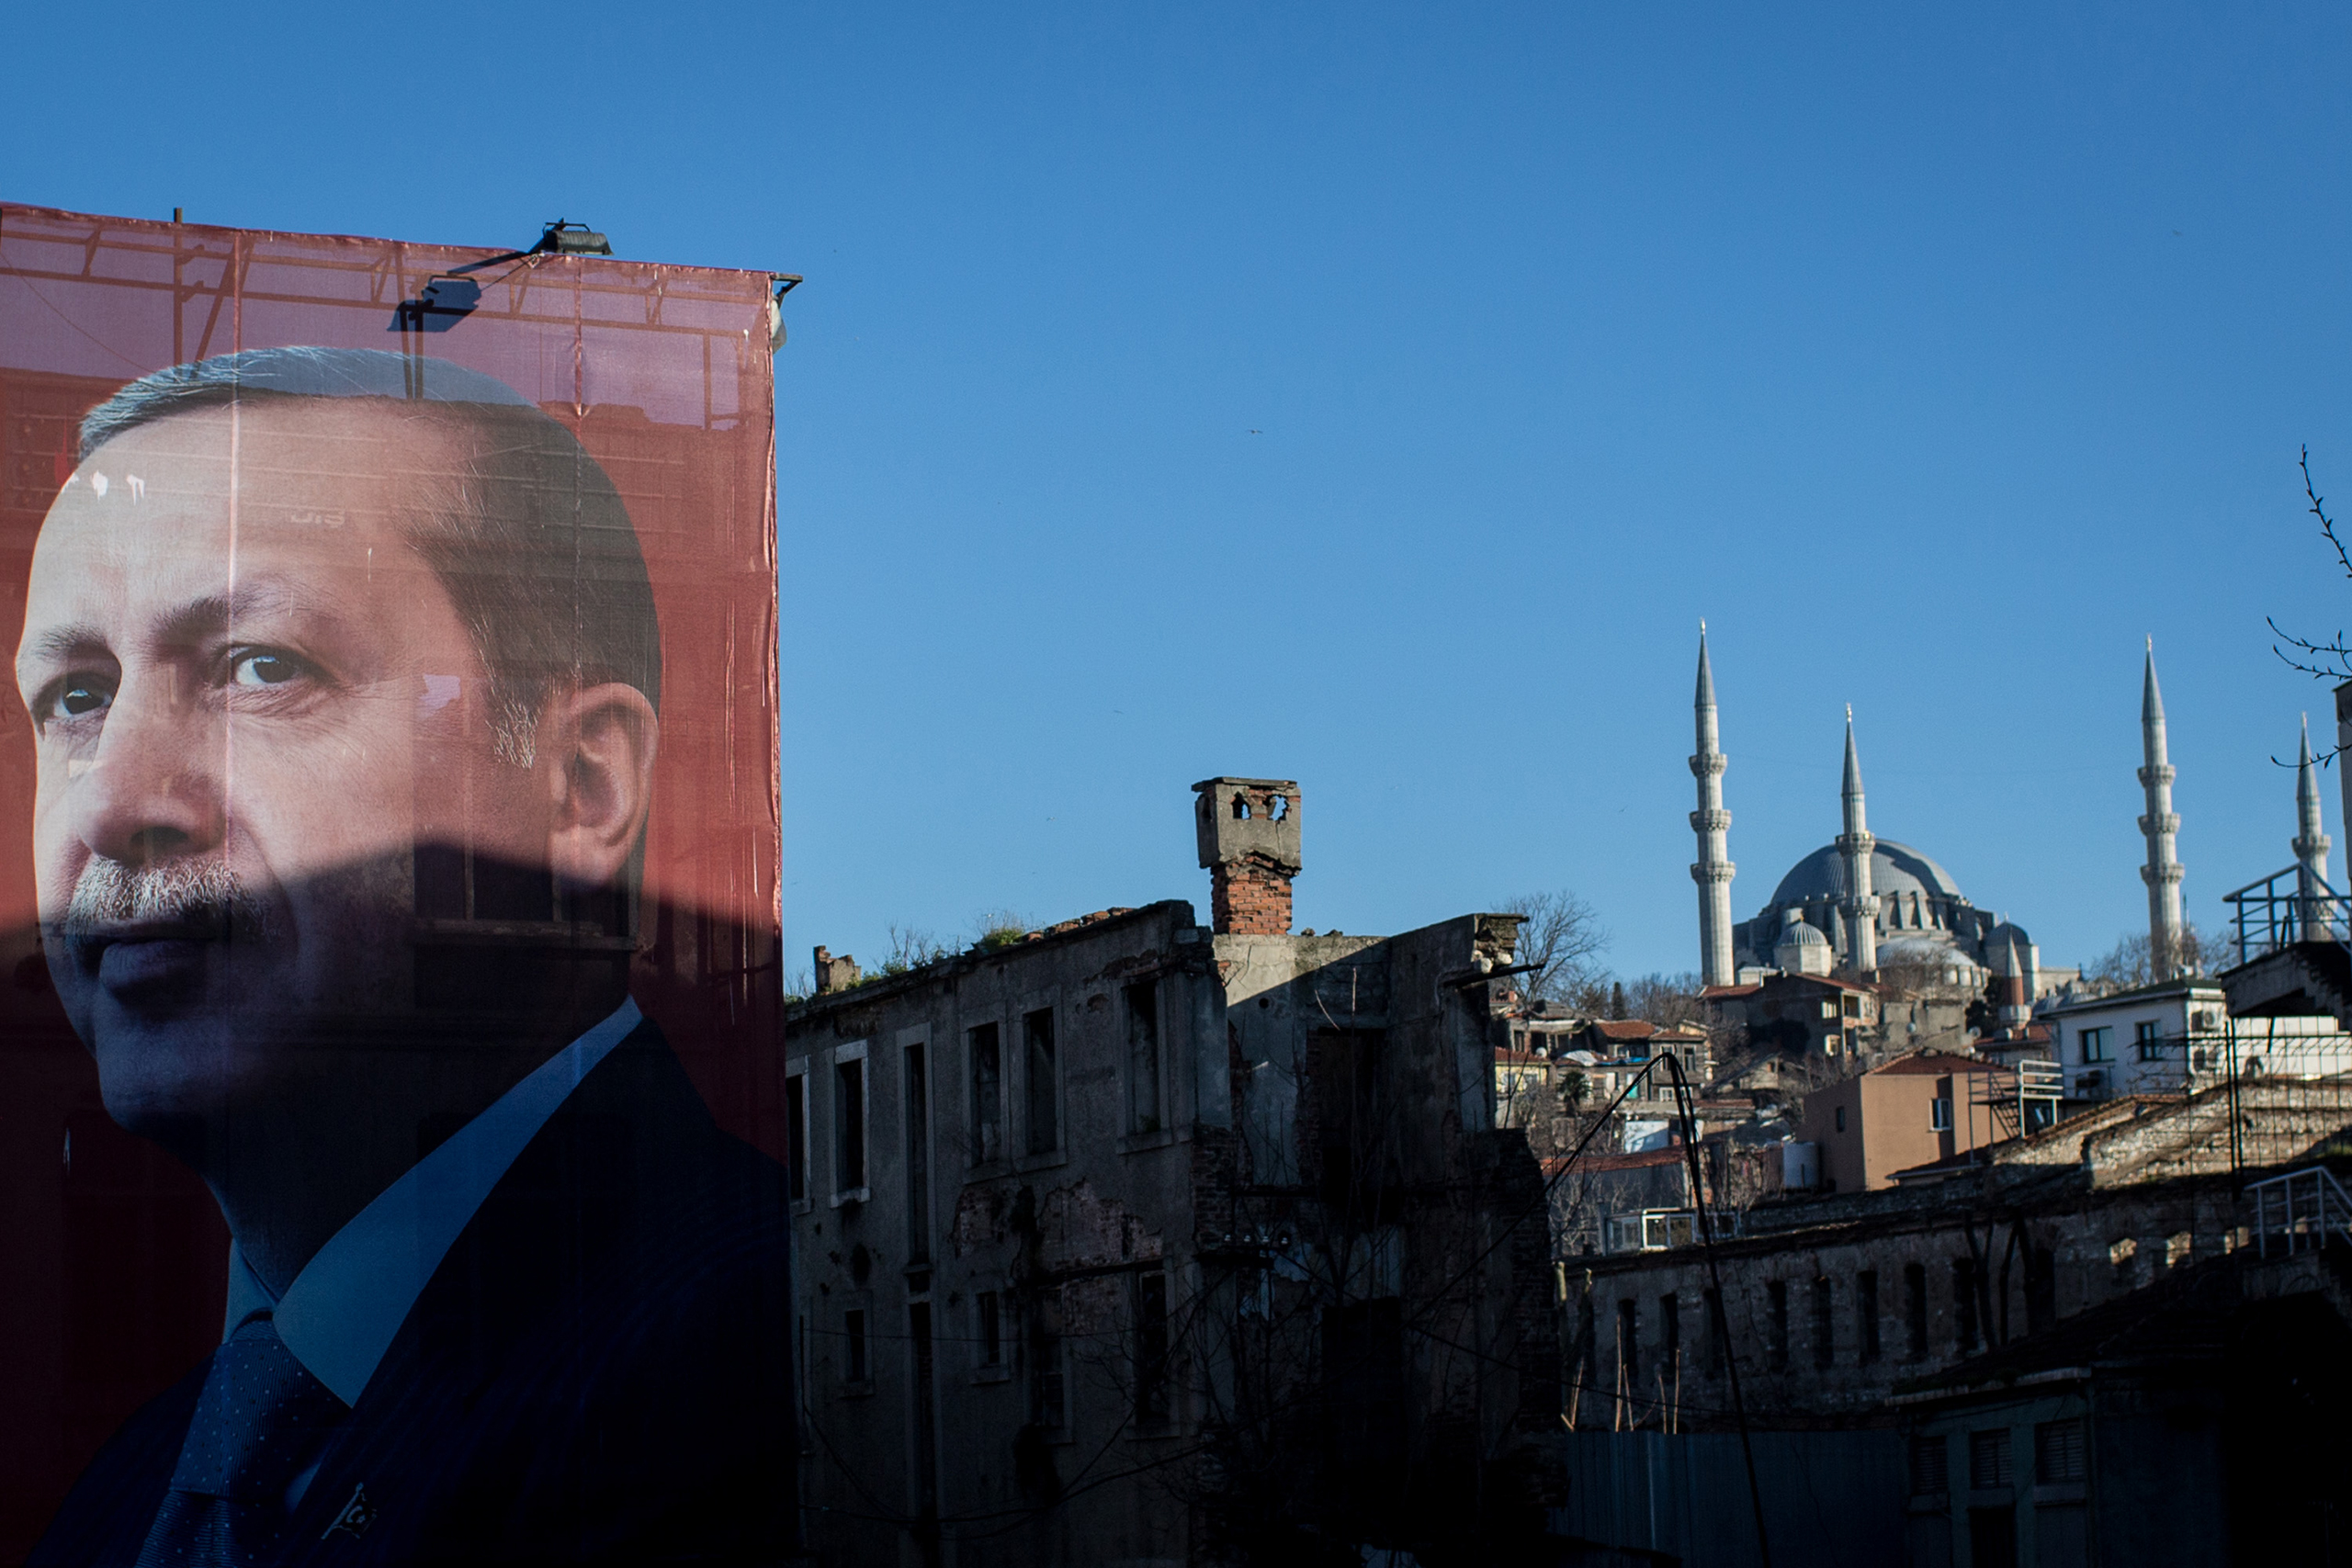 A "Yes" campaign billboard showing President Recep Tayyip Erdogan in Istanbul on March 29, 2017. Turkey holds a referendum on constitutional amendments on April 16. (Chris McGrath—Getty Images)